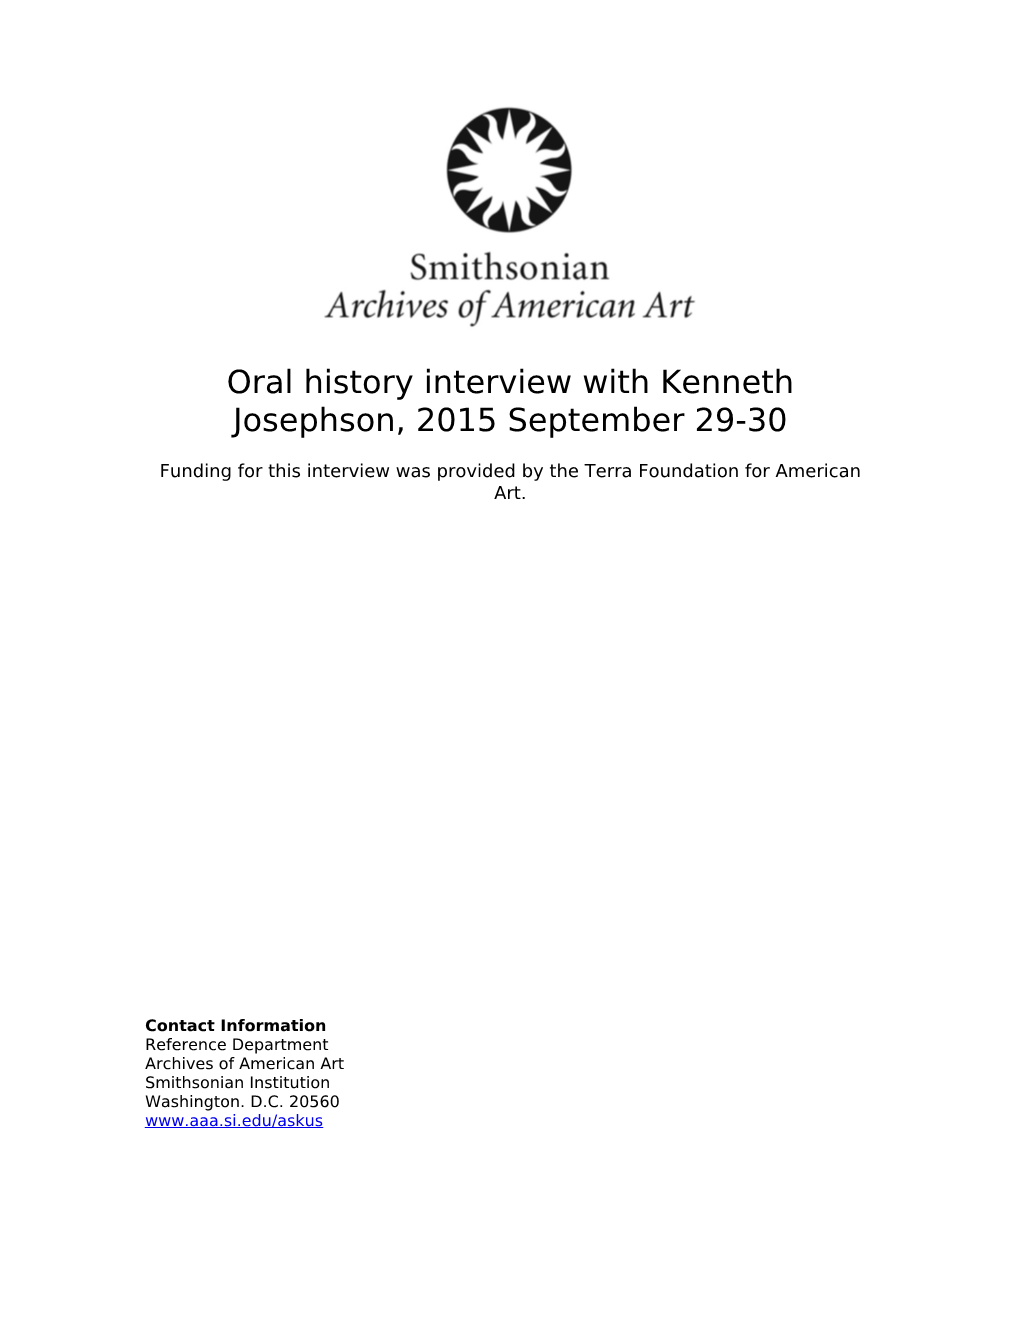 Oral History Interview with Kenneth Josephson, 2015 September 29-30